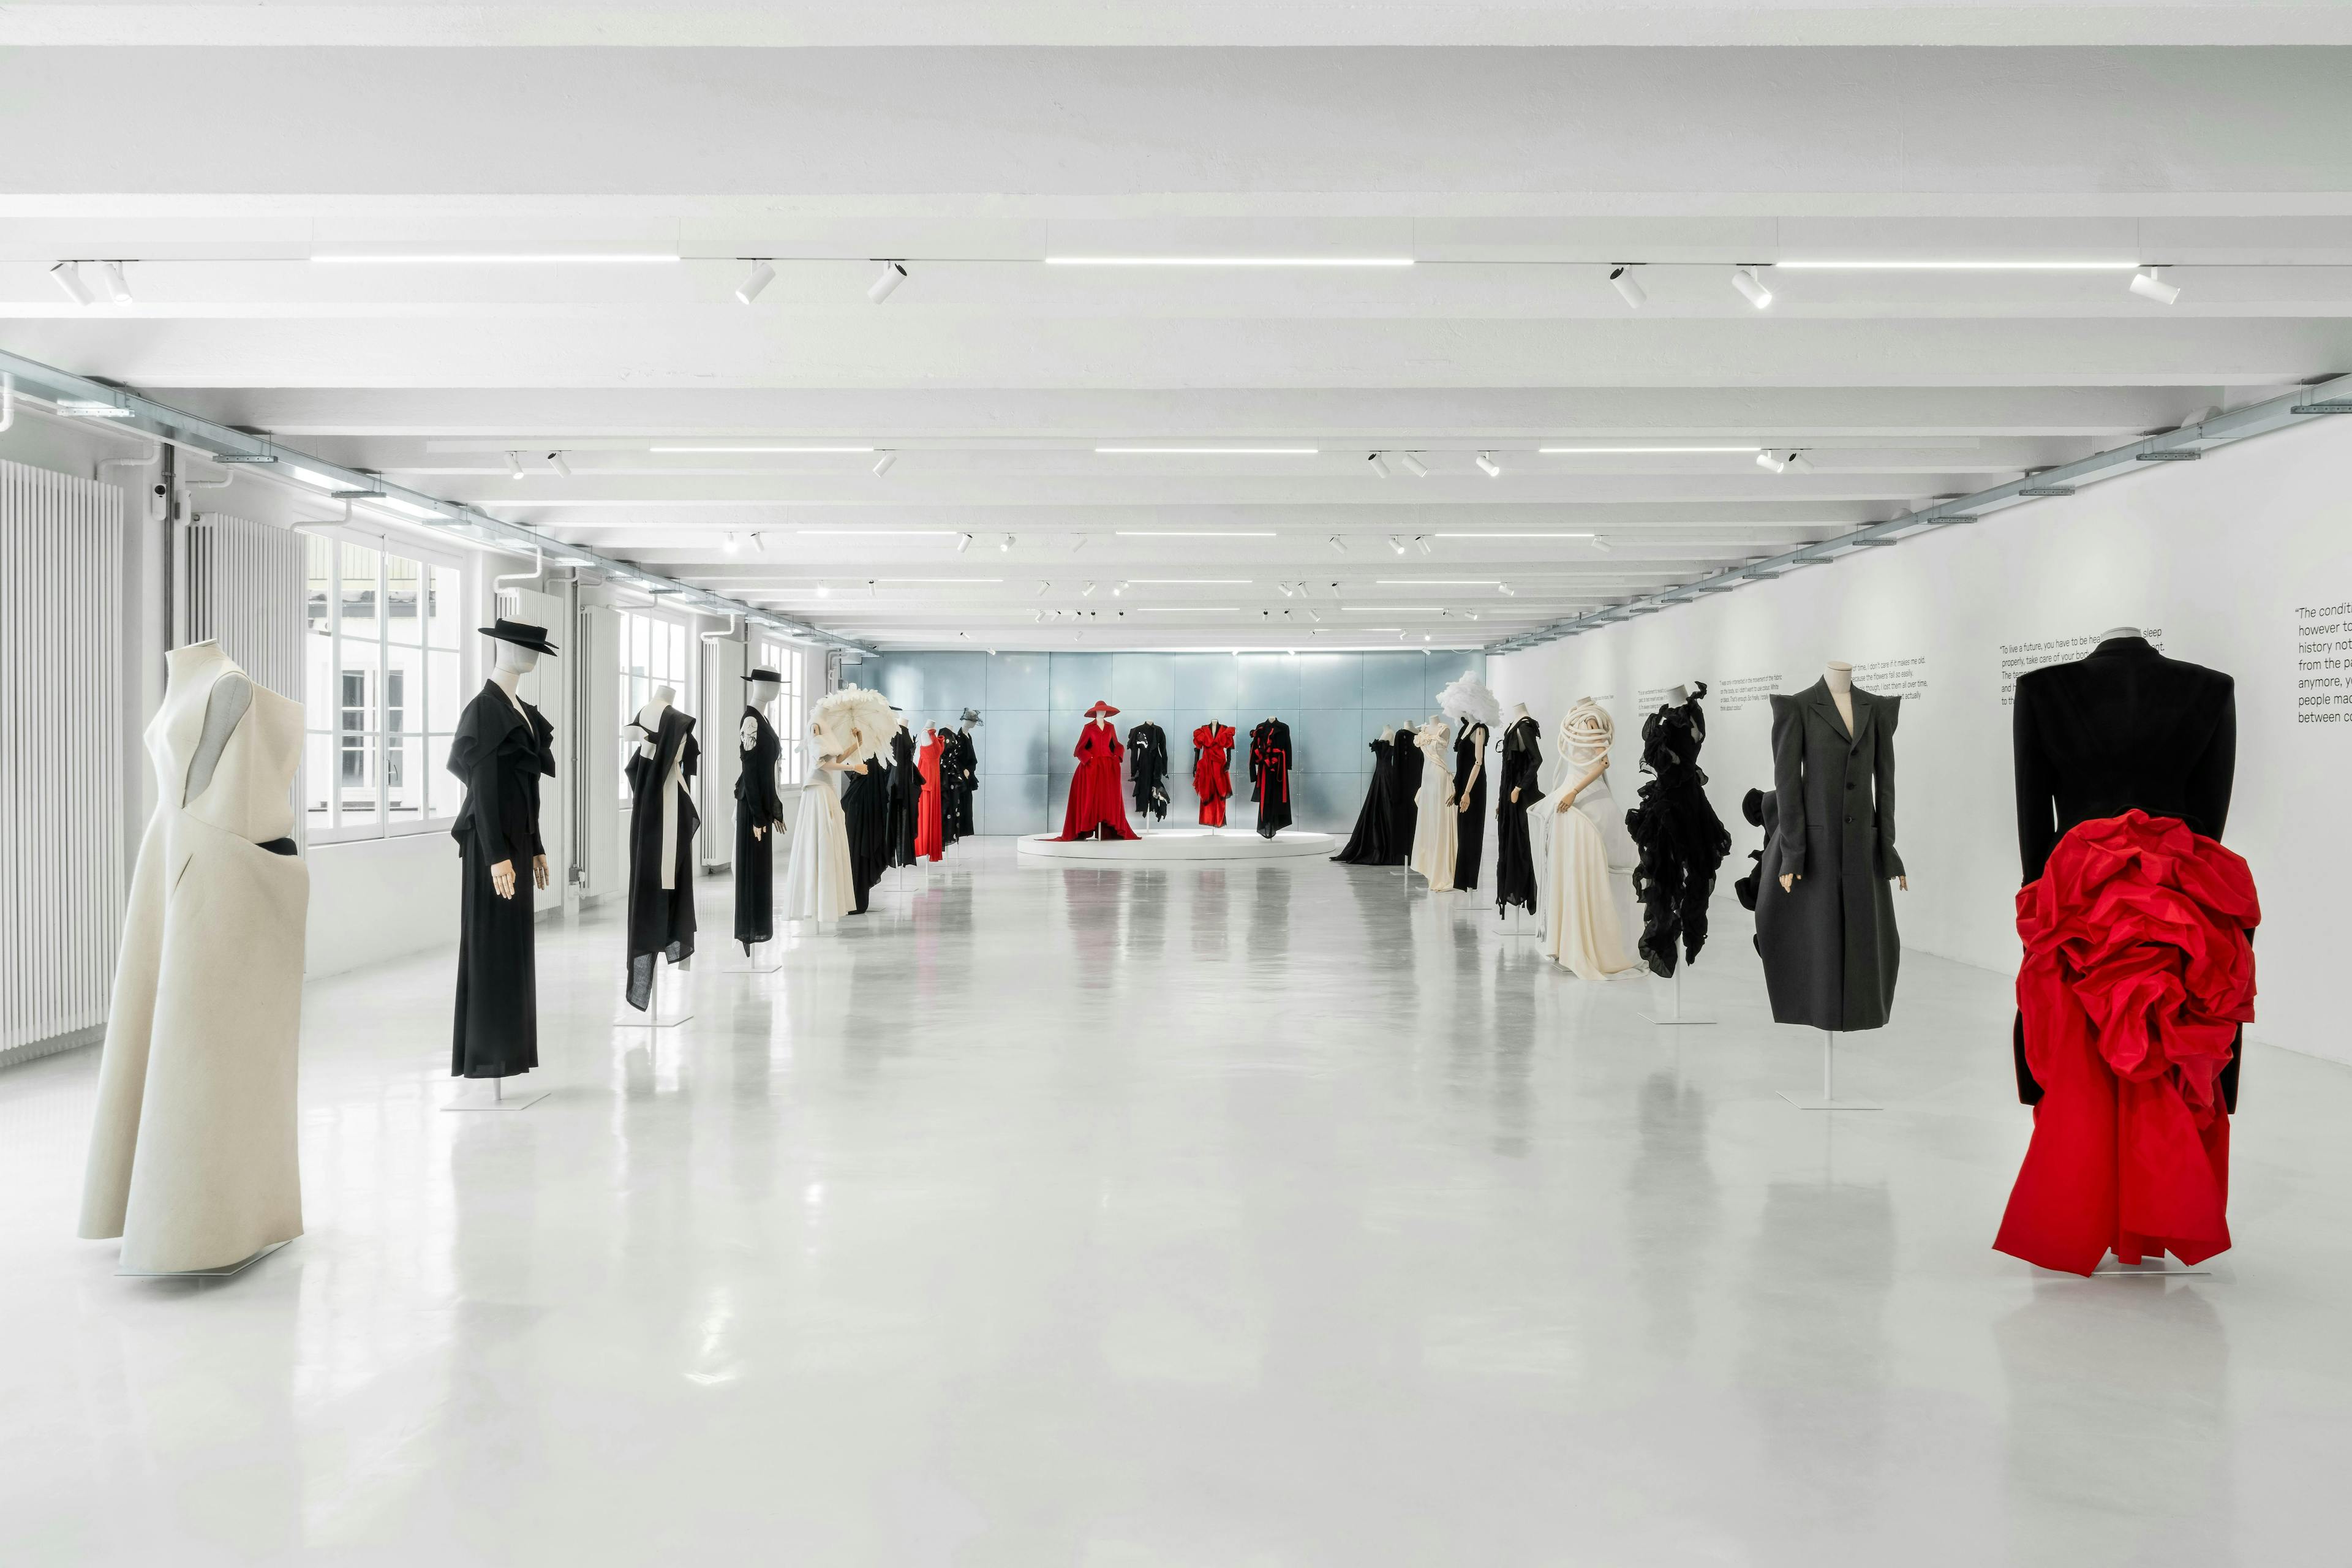 The exhibition "Yohji Yamamoto. Letter to the future" from May 16 to July 31, 2024 at the 10 Corso Como gallery in Milan (Photos courtesy of 10 Corso Como)